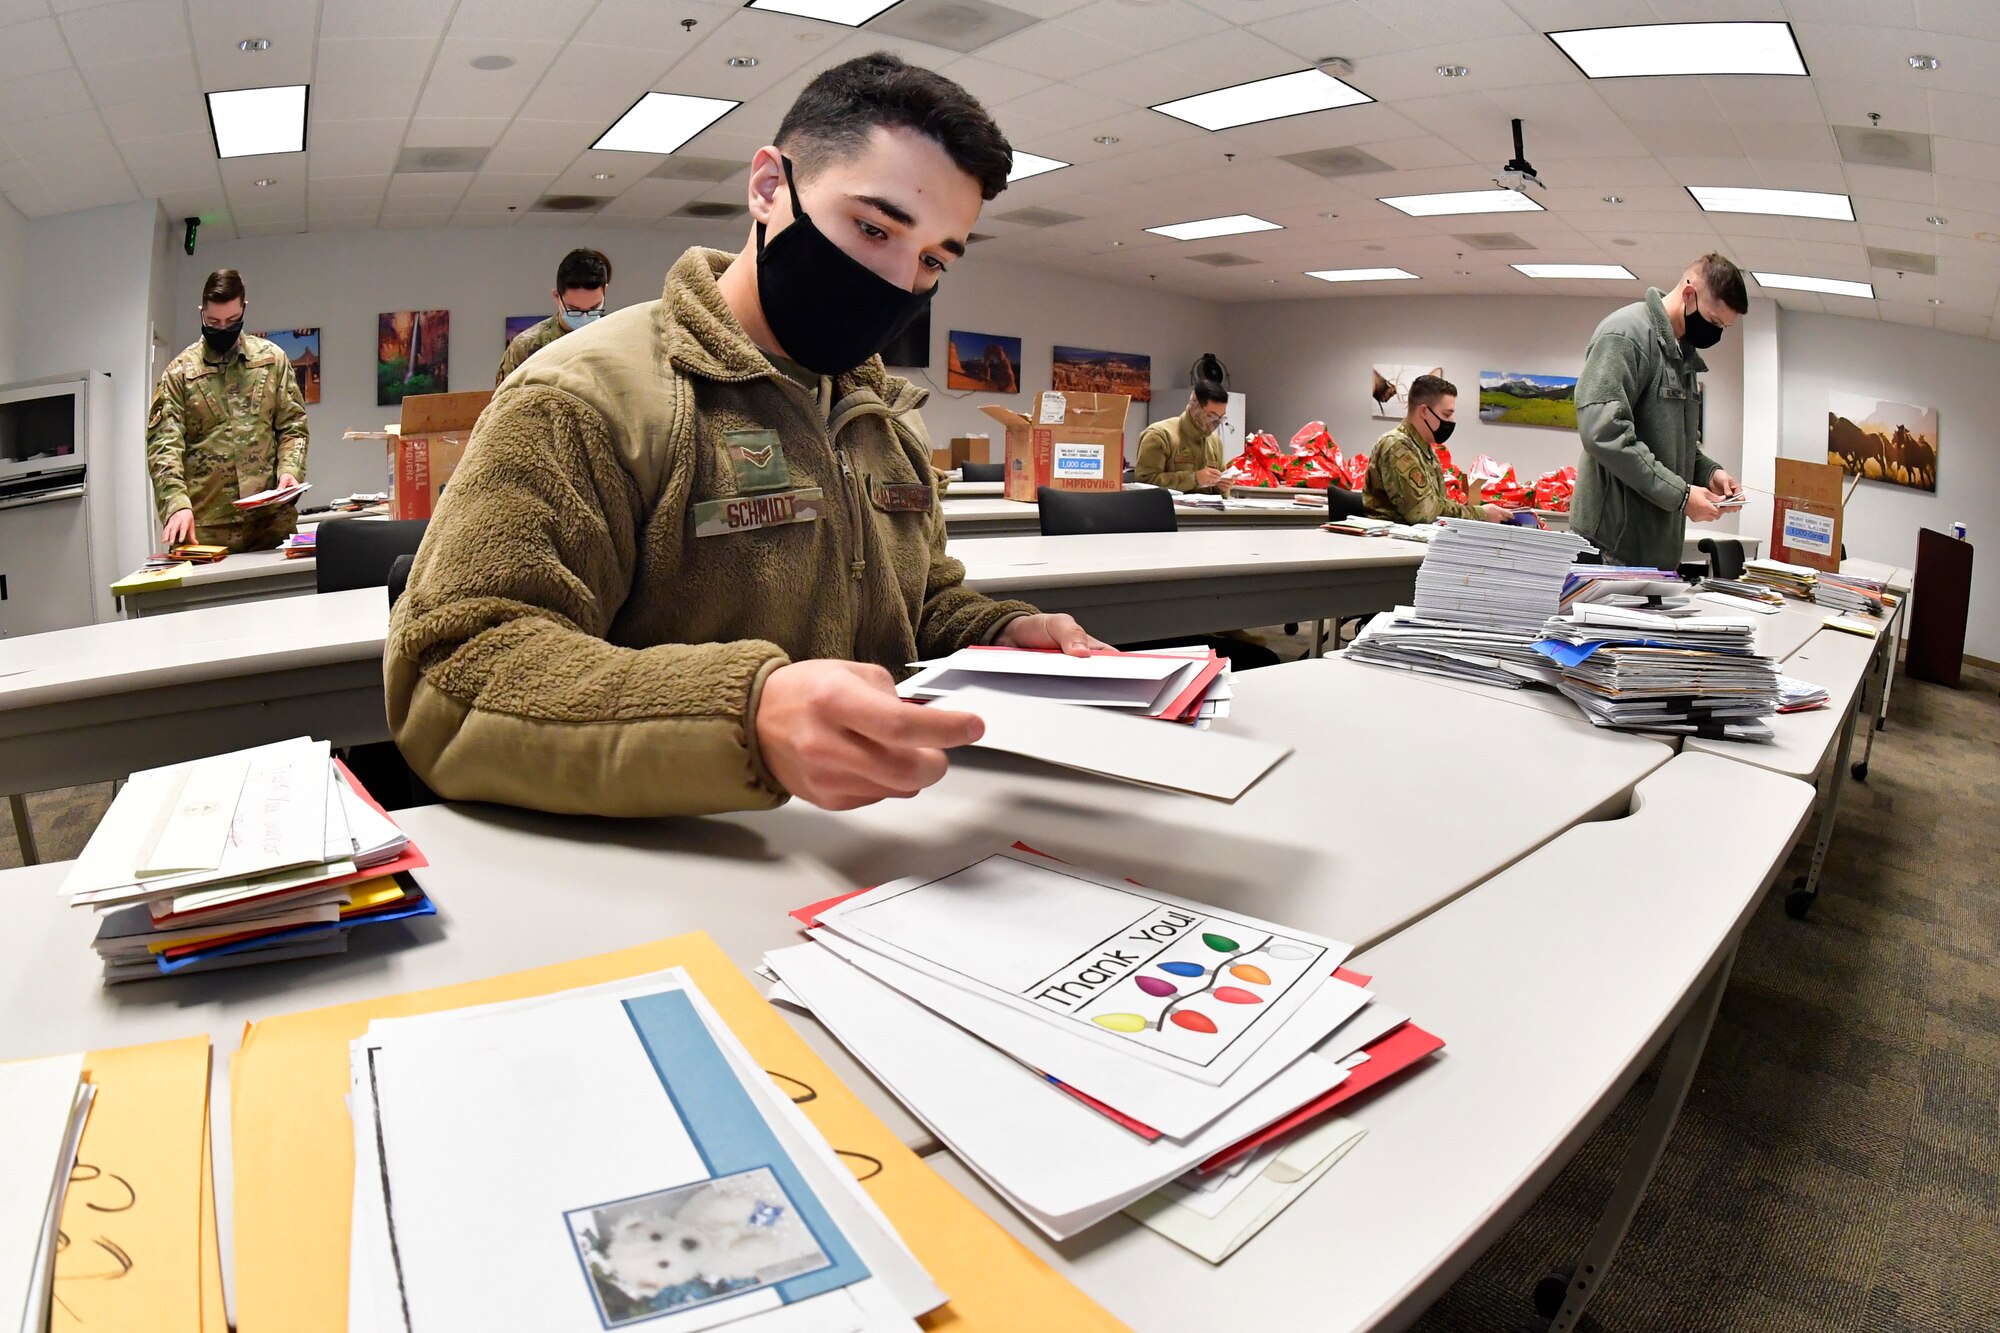 An Airman sorts holiday cards on a table.